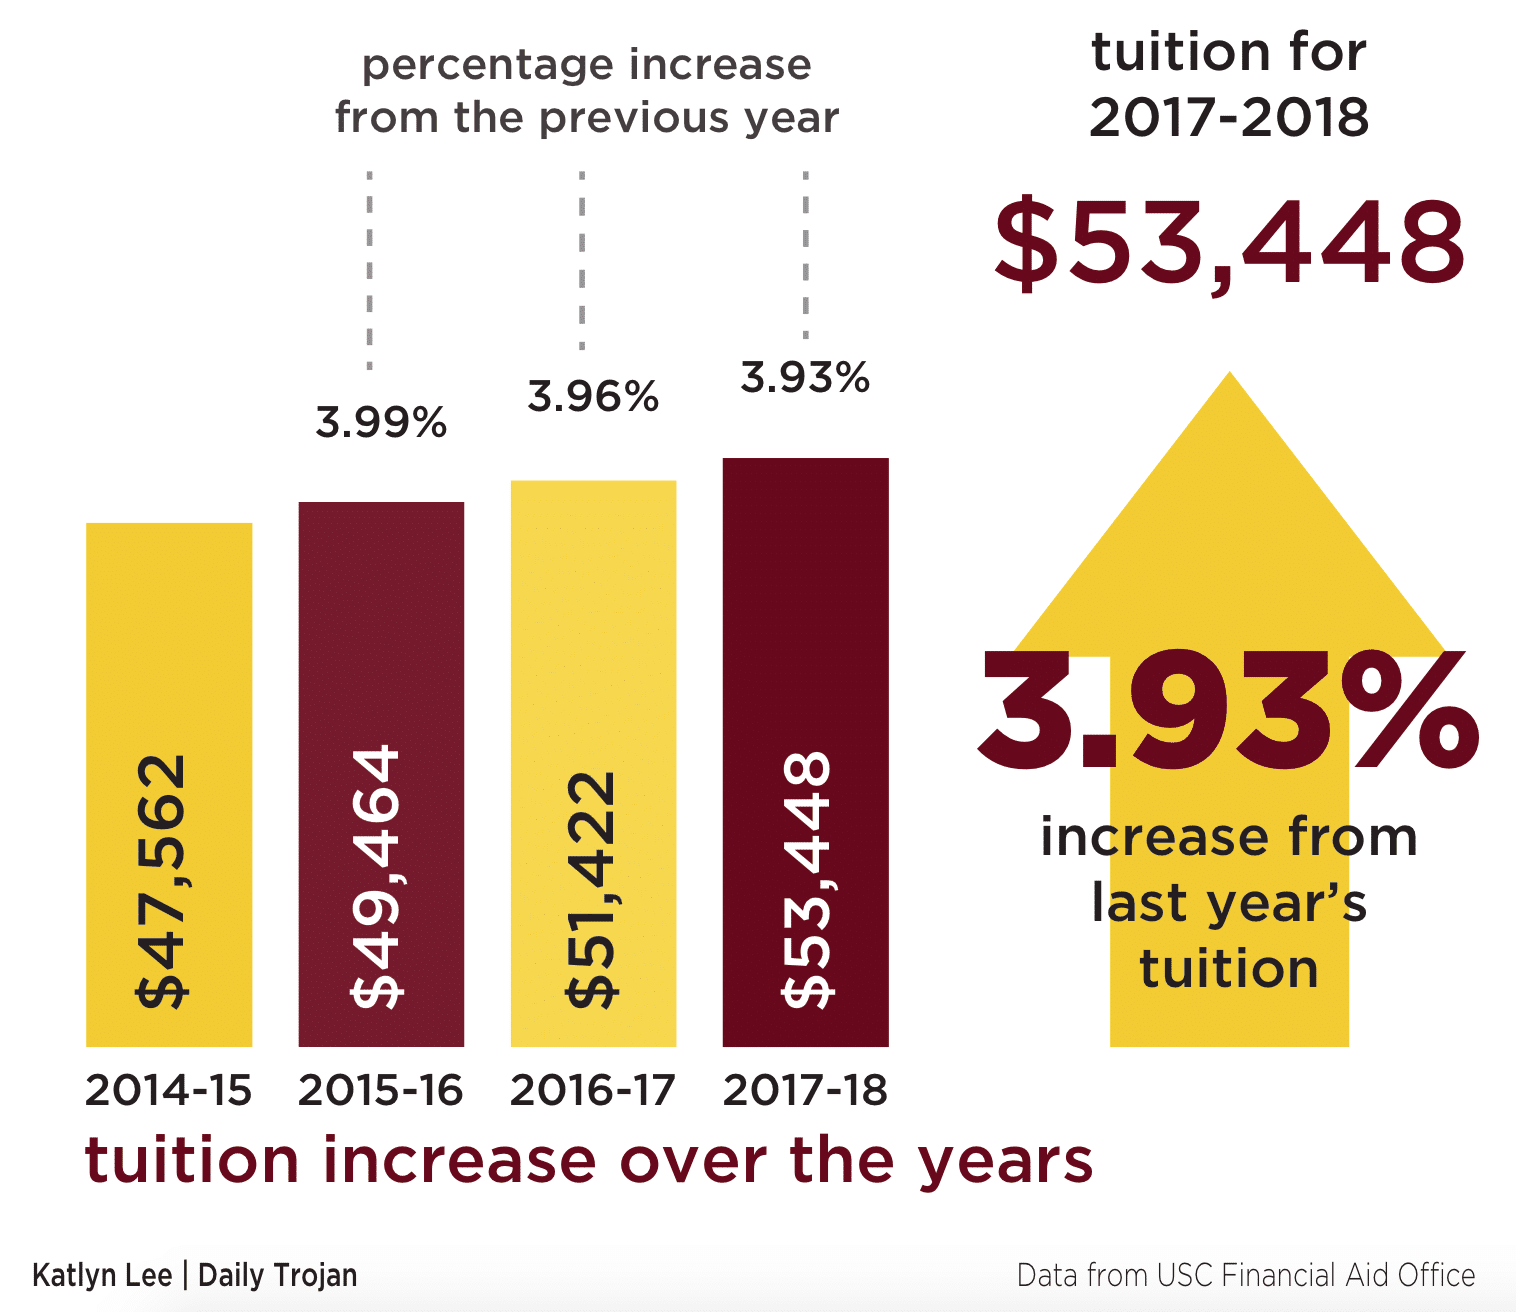 USC administration increases tuition by $2,006 for next academic year ...